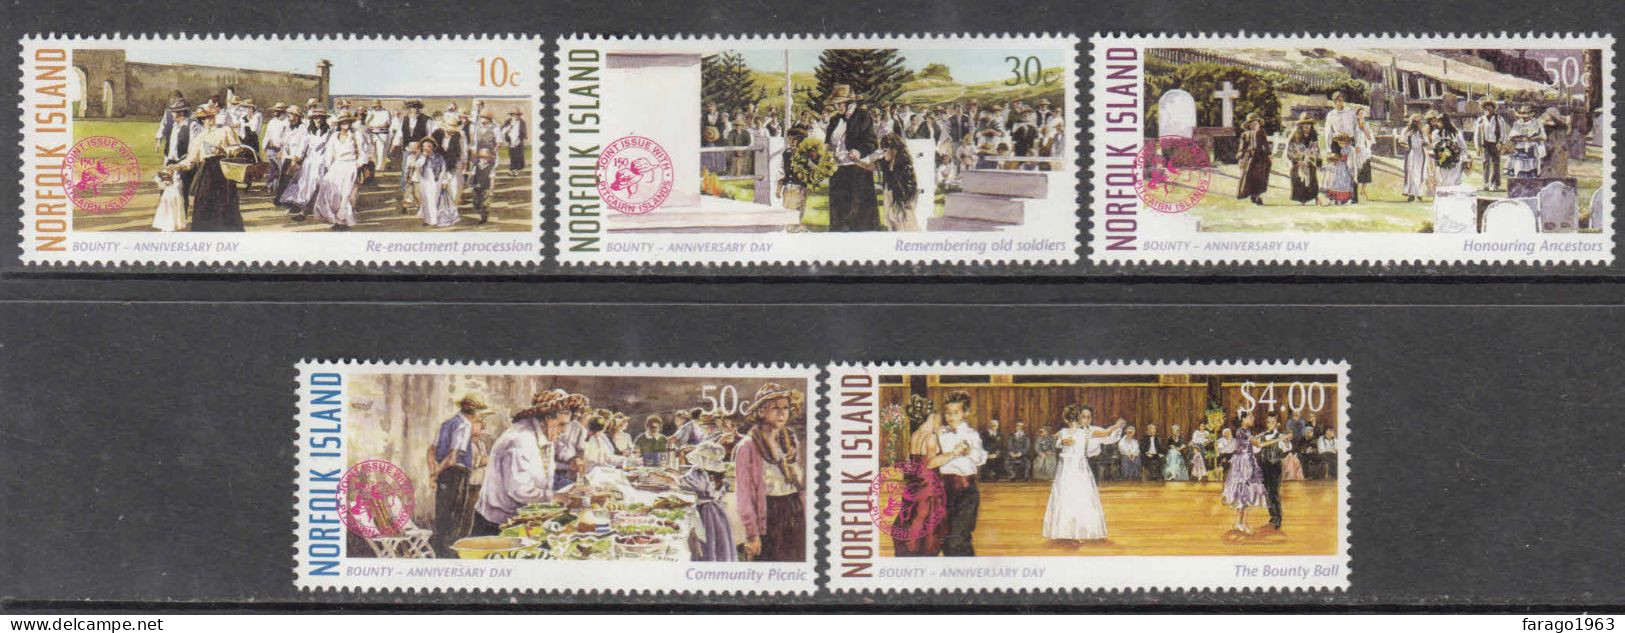 2006 Norfolk Island Bounty Anniversary Day JOINT ISSUE Pitcairn  Complete Set Of 5 MNH - Isla Norfolk